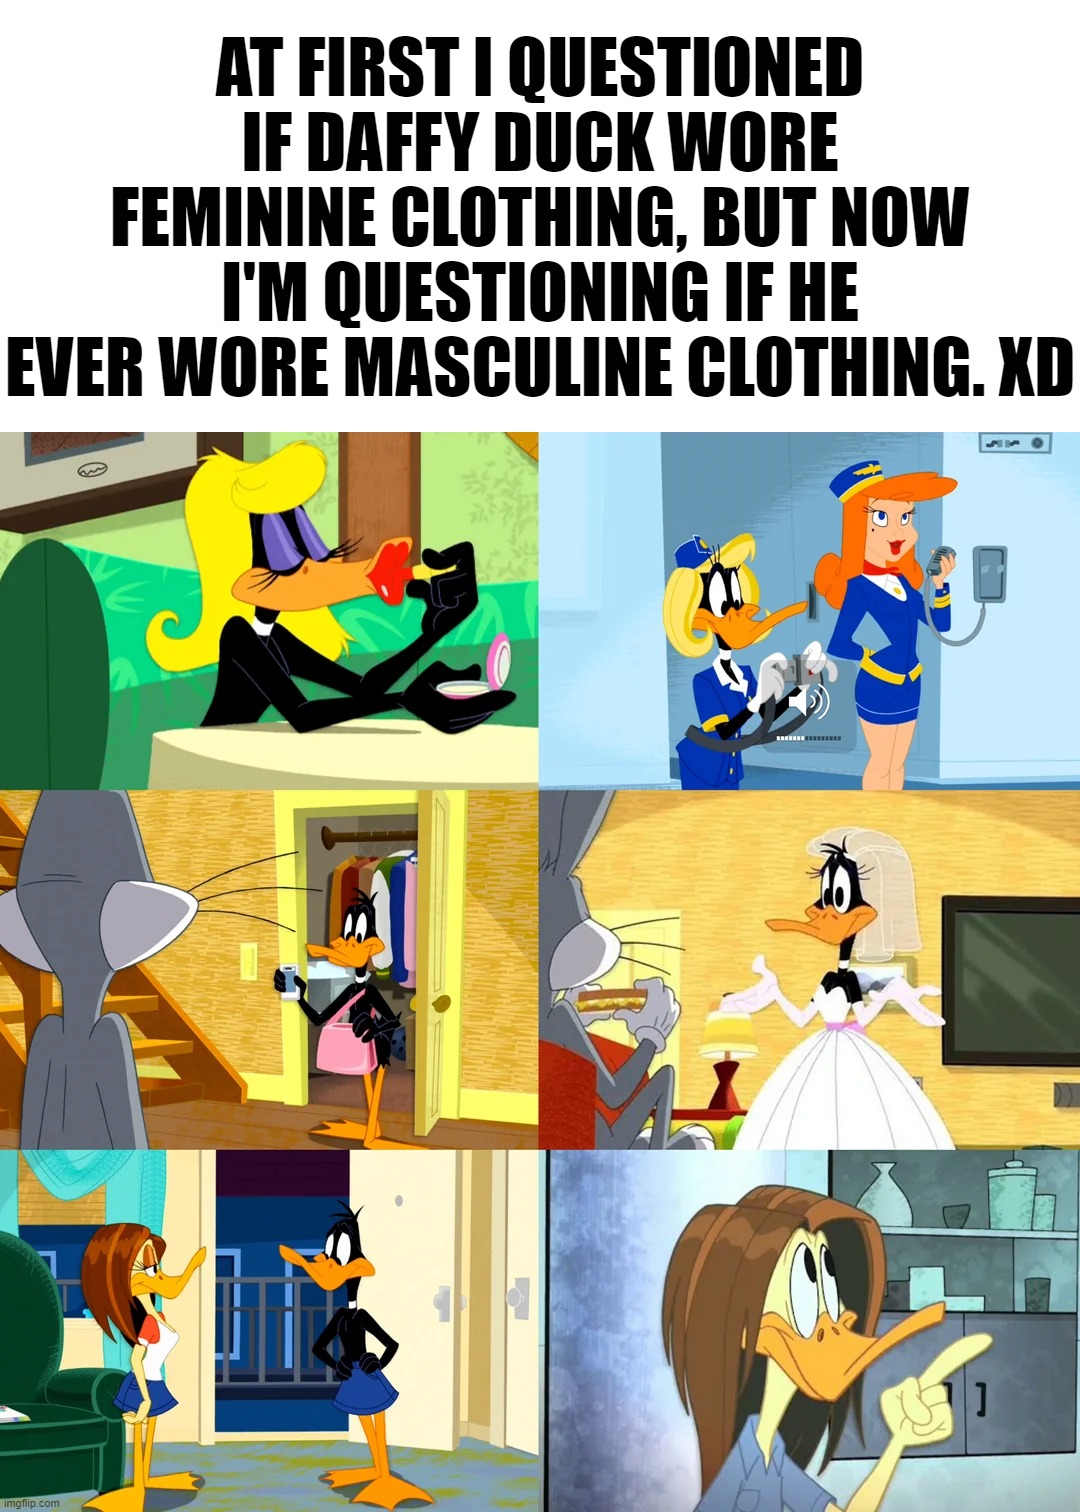 I'm guessing Warner Bros thought locking him to one gender would be such a DRAG. xD | AT FIRST I QUESTIONED IF DAFFY DUCK WORE FEMININE CLOTHING, BUT NOW I'M QUESTIONING IF HE EVER WORE MASCULINE CLOTHING. XD | image tagged in daffy duck | made w/ Imgflip meme maker